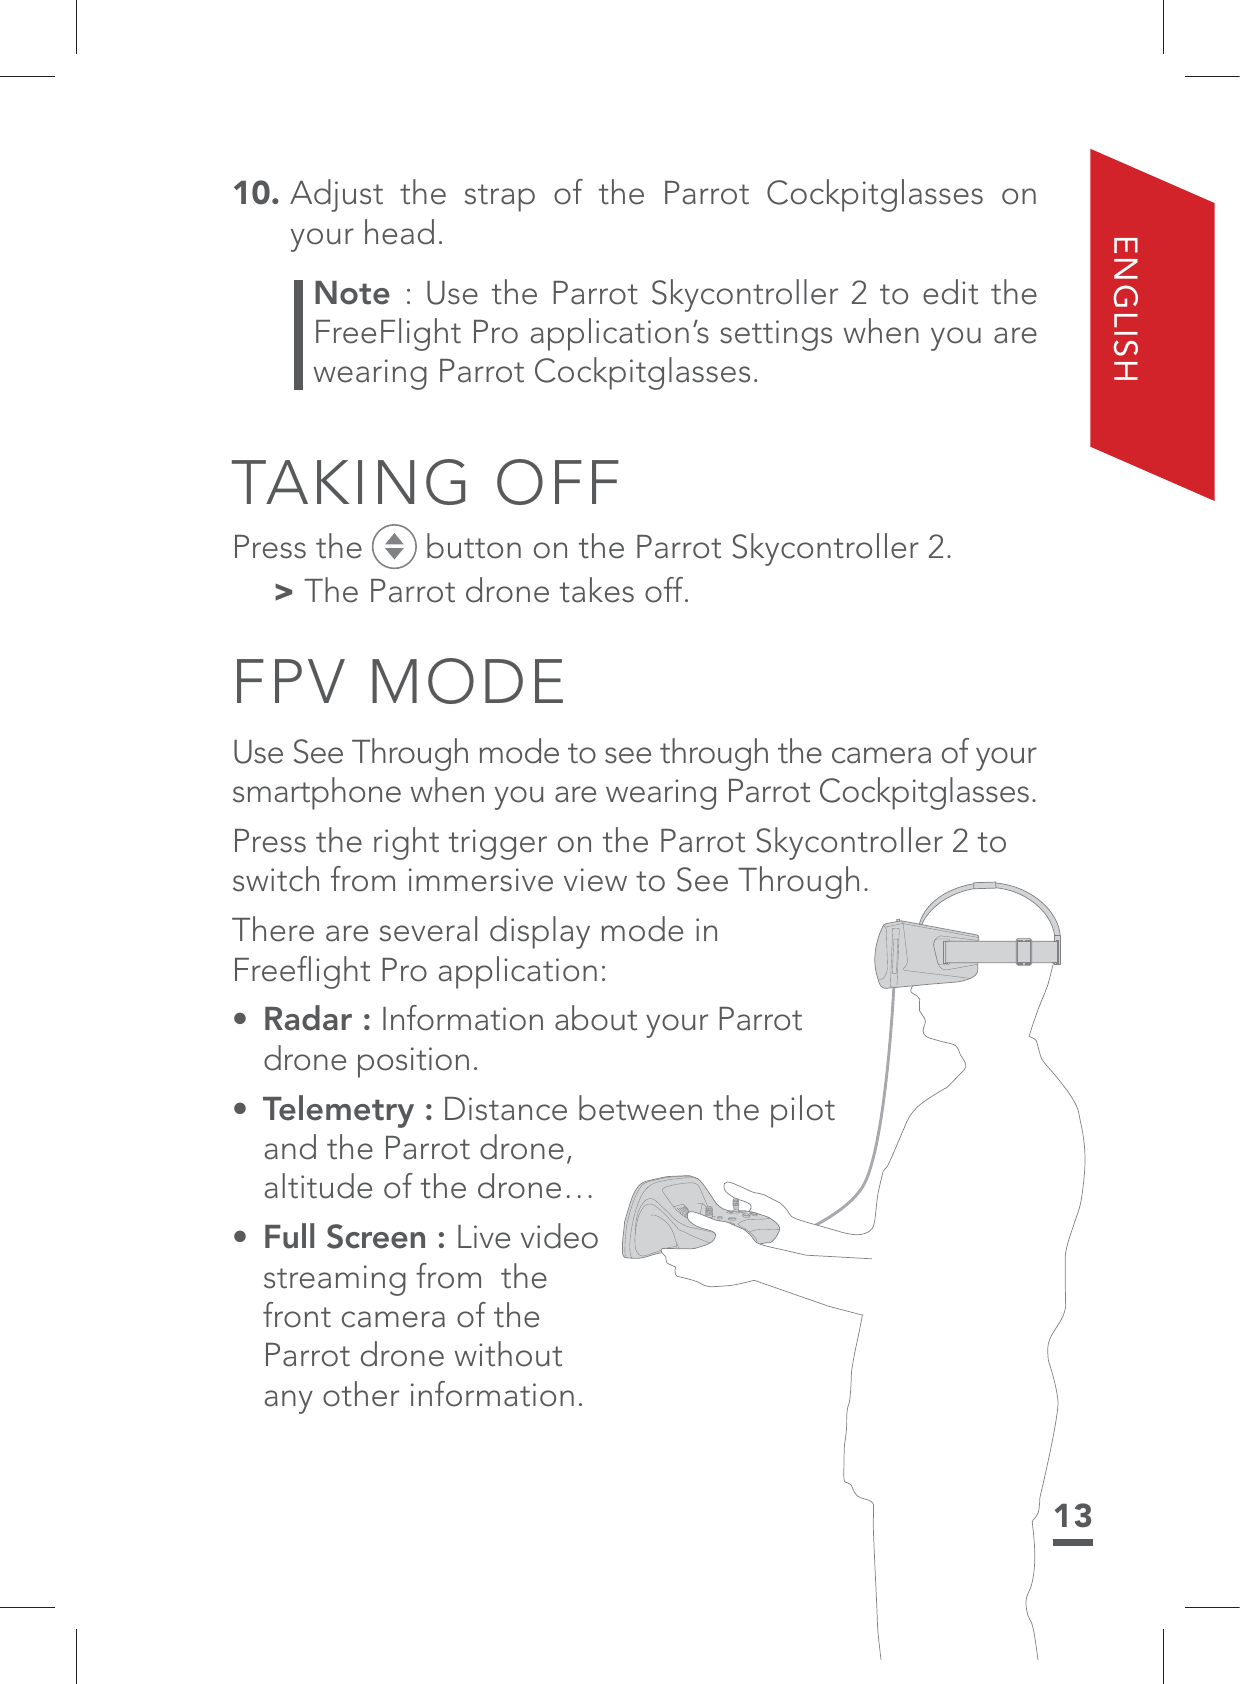 13ENGLISH10.  Adjust the strap of the Parrot Cockpitglasses on your head.Note : Use the Parrot Skycontroller 2 to edit the FreeFlight Pro application’s settings when you are wearing Parrot Cockpitglasses.TAKING OFFPress the   button on the Parrot Skycontroller 2. &gt; The Parrot drone takes off.FPV MODEUse See Through mode to see through the camera of your smartphone when you are wearing Parrot Cockpitglasses. Press the right trigger on the Parrot Skycontroller 2 to switch from immersive view to See Through.There are several display mode in Freeﬂight Pro application: • Radar : Information about your Parrot drone position.• Telemetry : Distance between the pilot and the Parrot drone,  altitude of the drone…•  Full Screen : Live video streaming from  the front camera of the Parrot drone without any other information. 